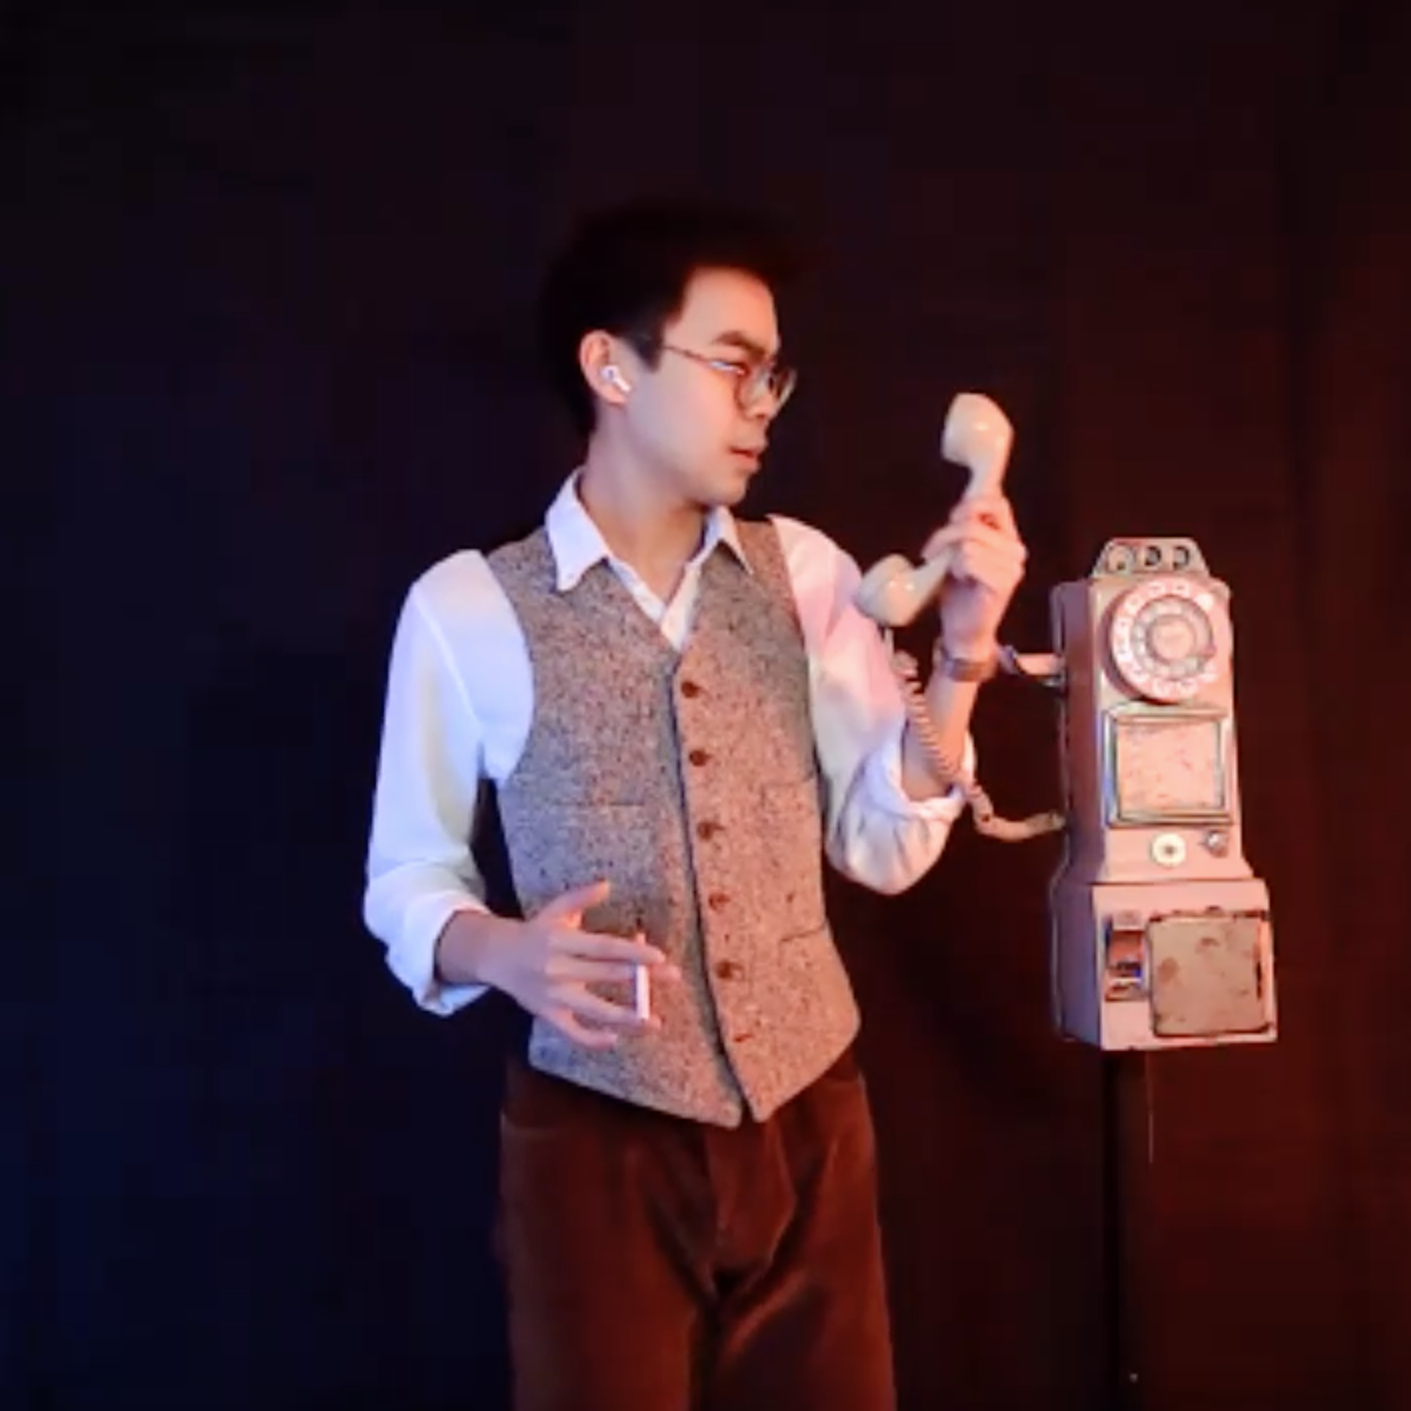 man with glasses and a vest holds a rotary phone in one hand and a cigarette in the other